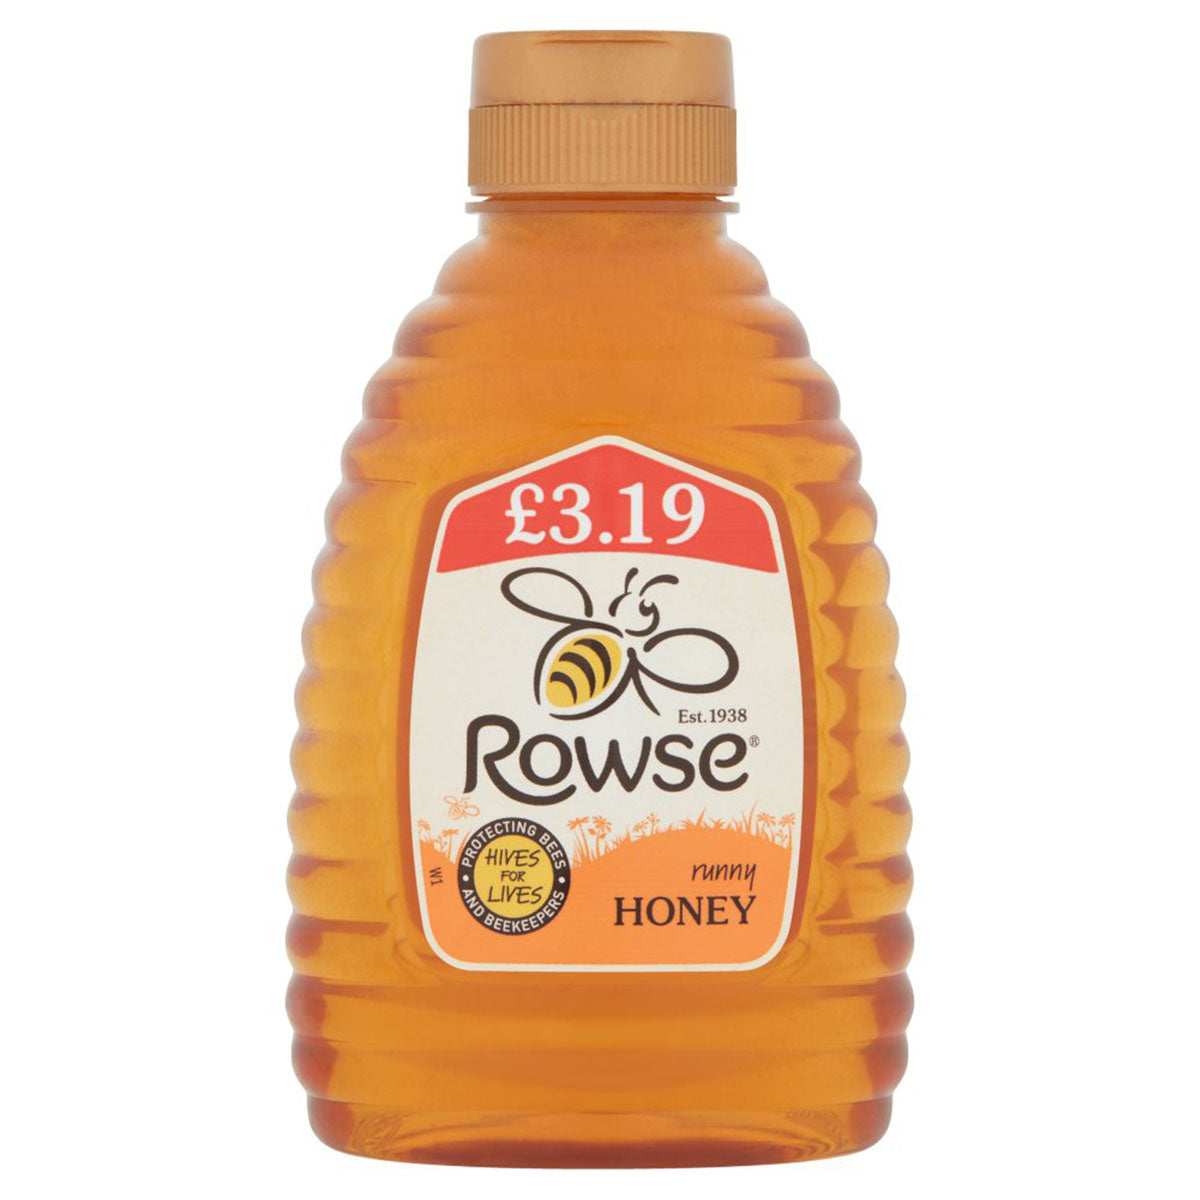 Rowse - Honey - 340g - Continental Food Store